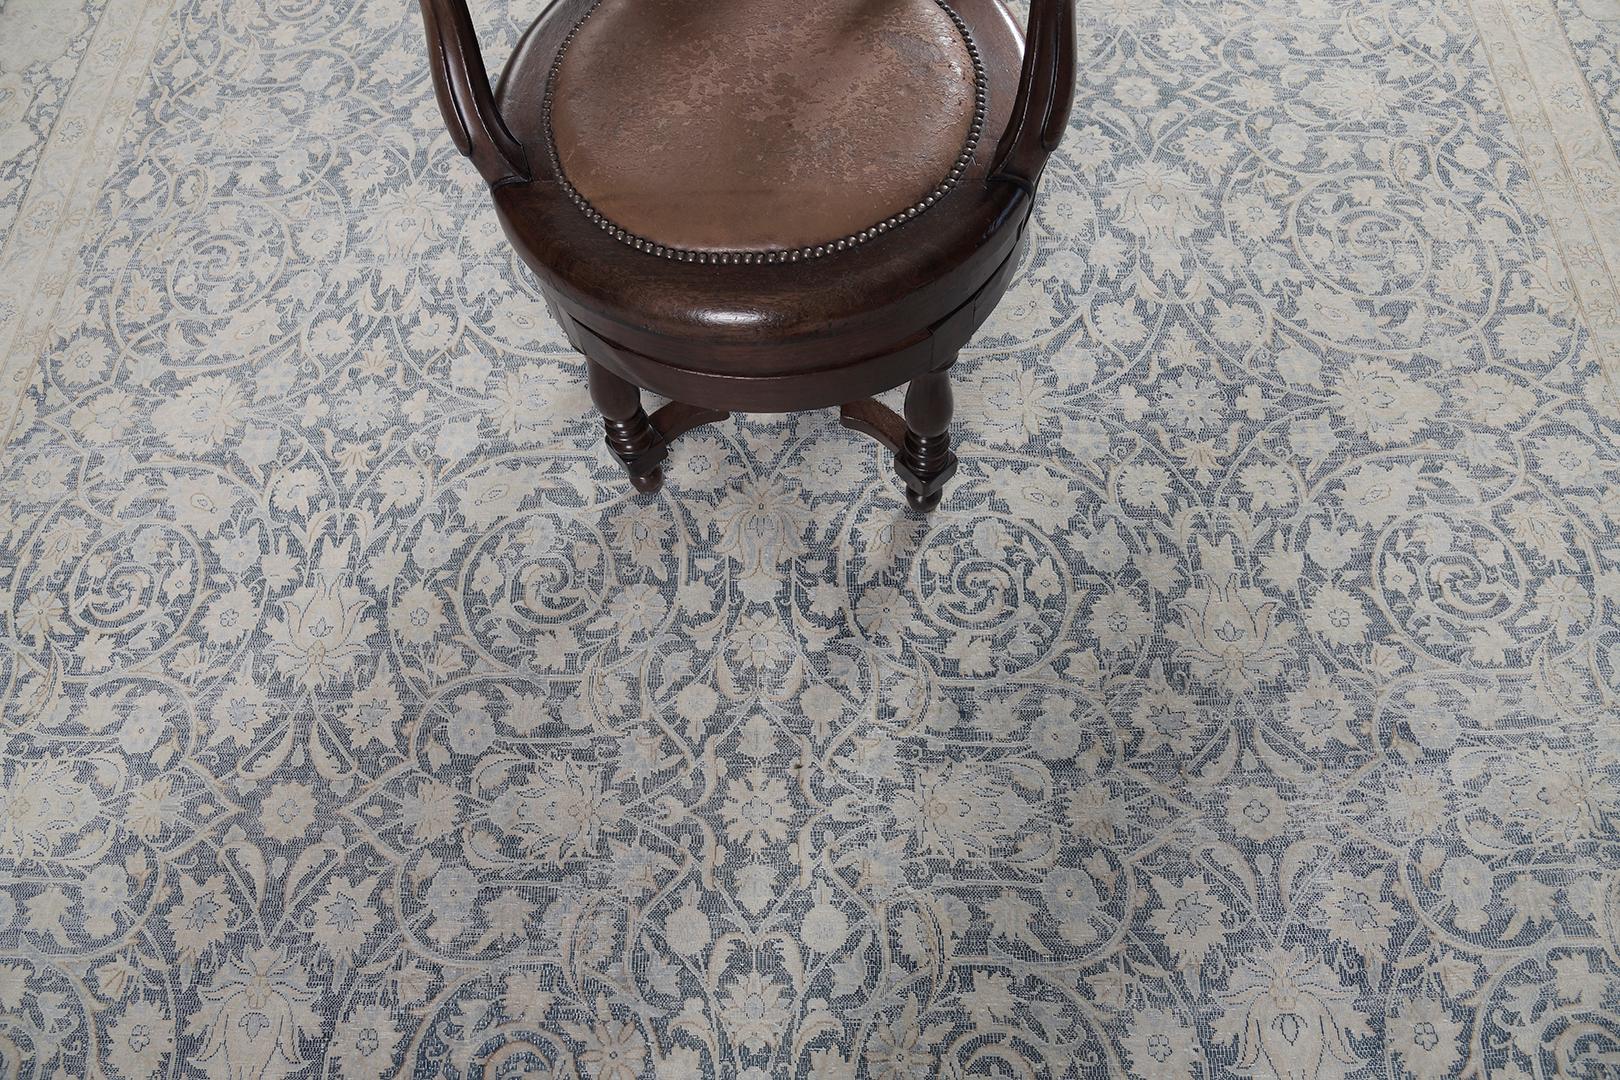 This delicate and stylish Kerman rug incorporates the borders that reflect the intricacy and colors that can be seen in the field of all-over spiral foliage and elegant florets. This results in a wonderfully harmonious look and feel. Earthy-tone